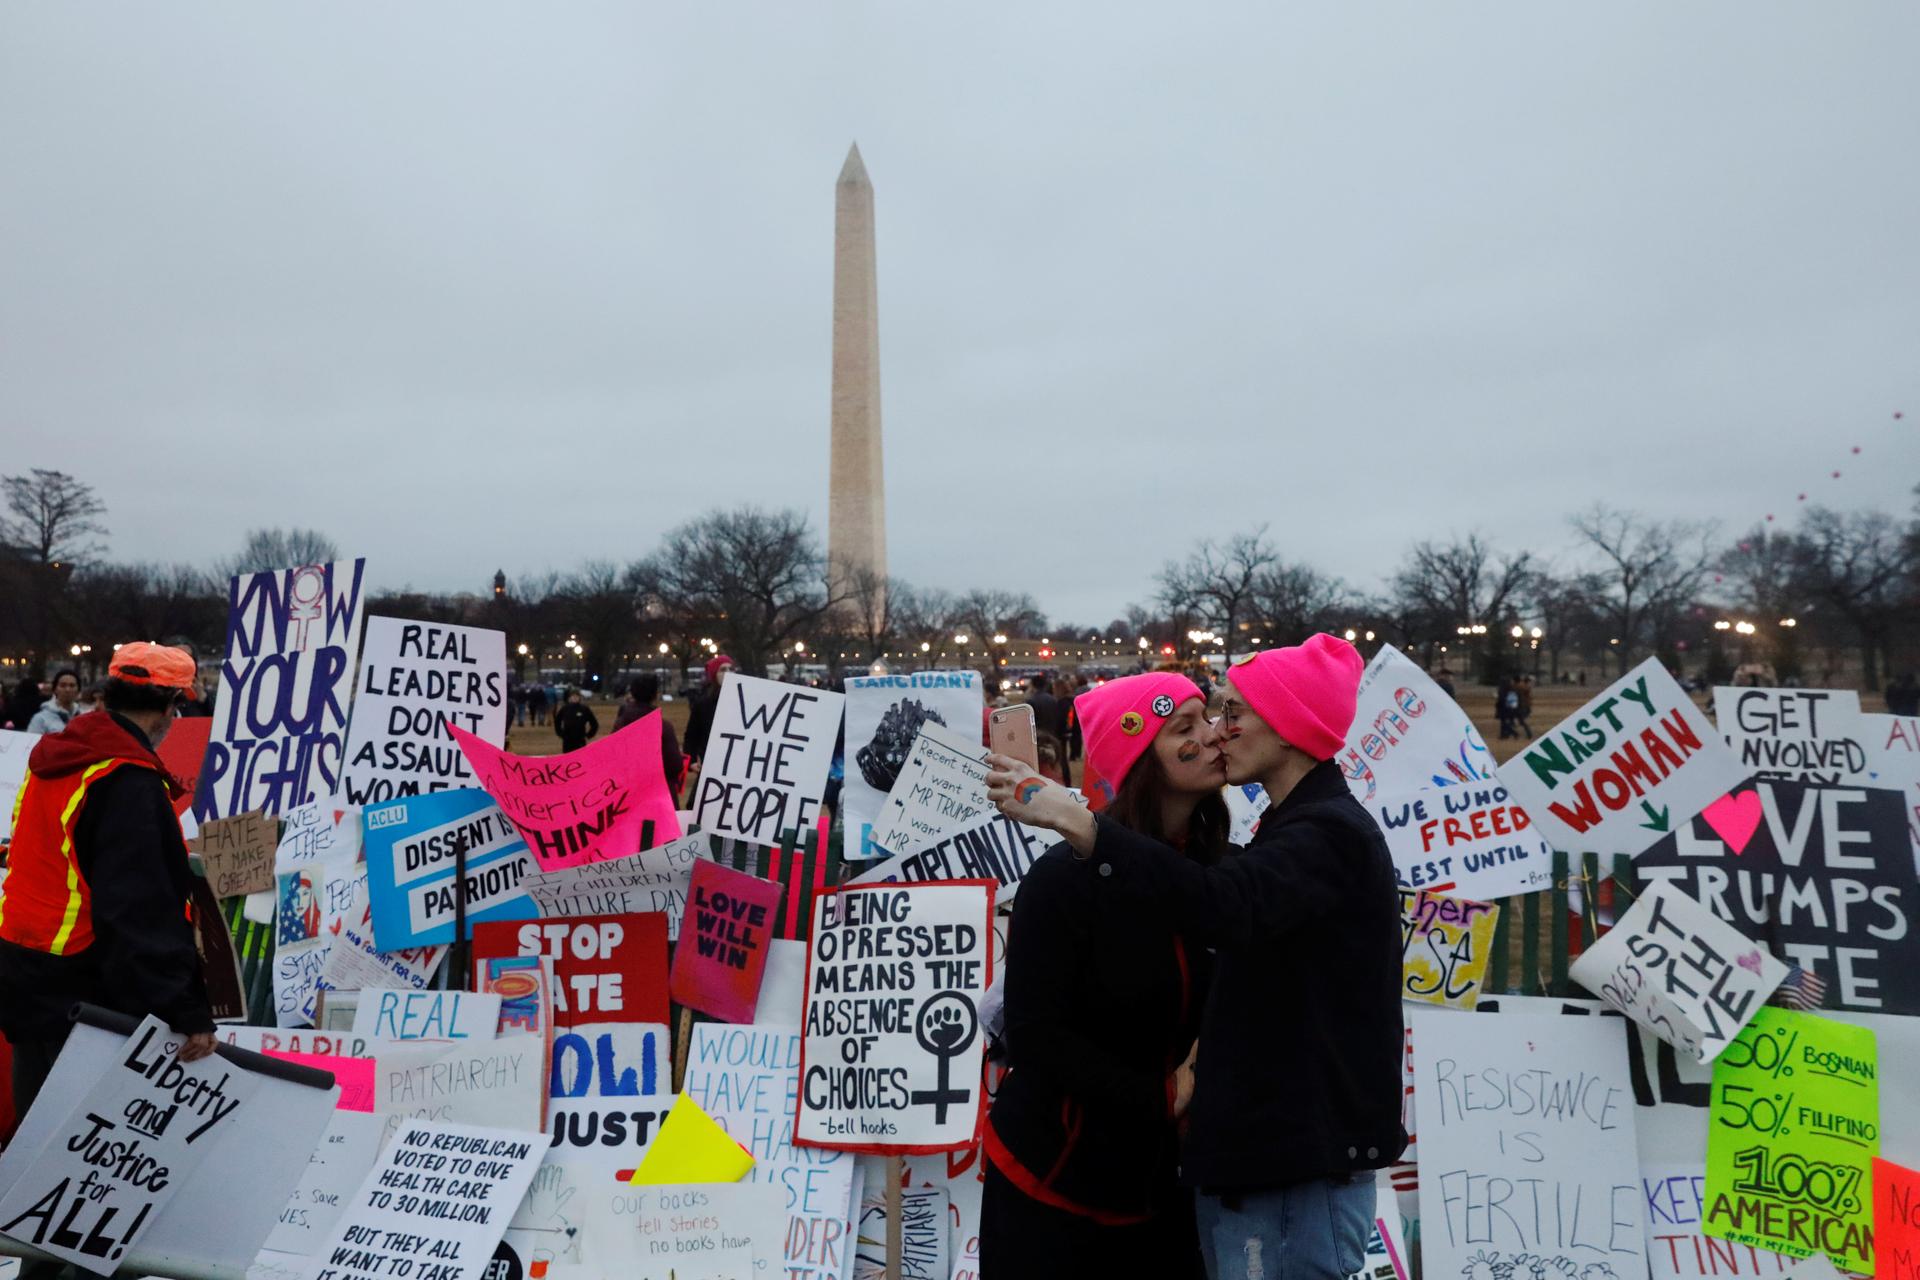 A same sex couple kisses in front of a wall of protest signs while taking part in the Women's March to protest Donald Trump's inauguration as the 45th president of the United States close to the White House in Washington, January 21, 2017.